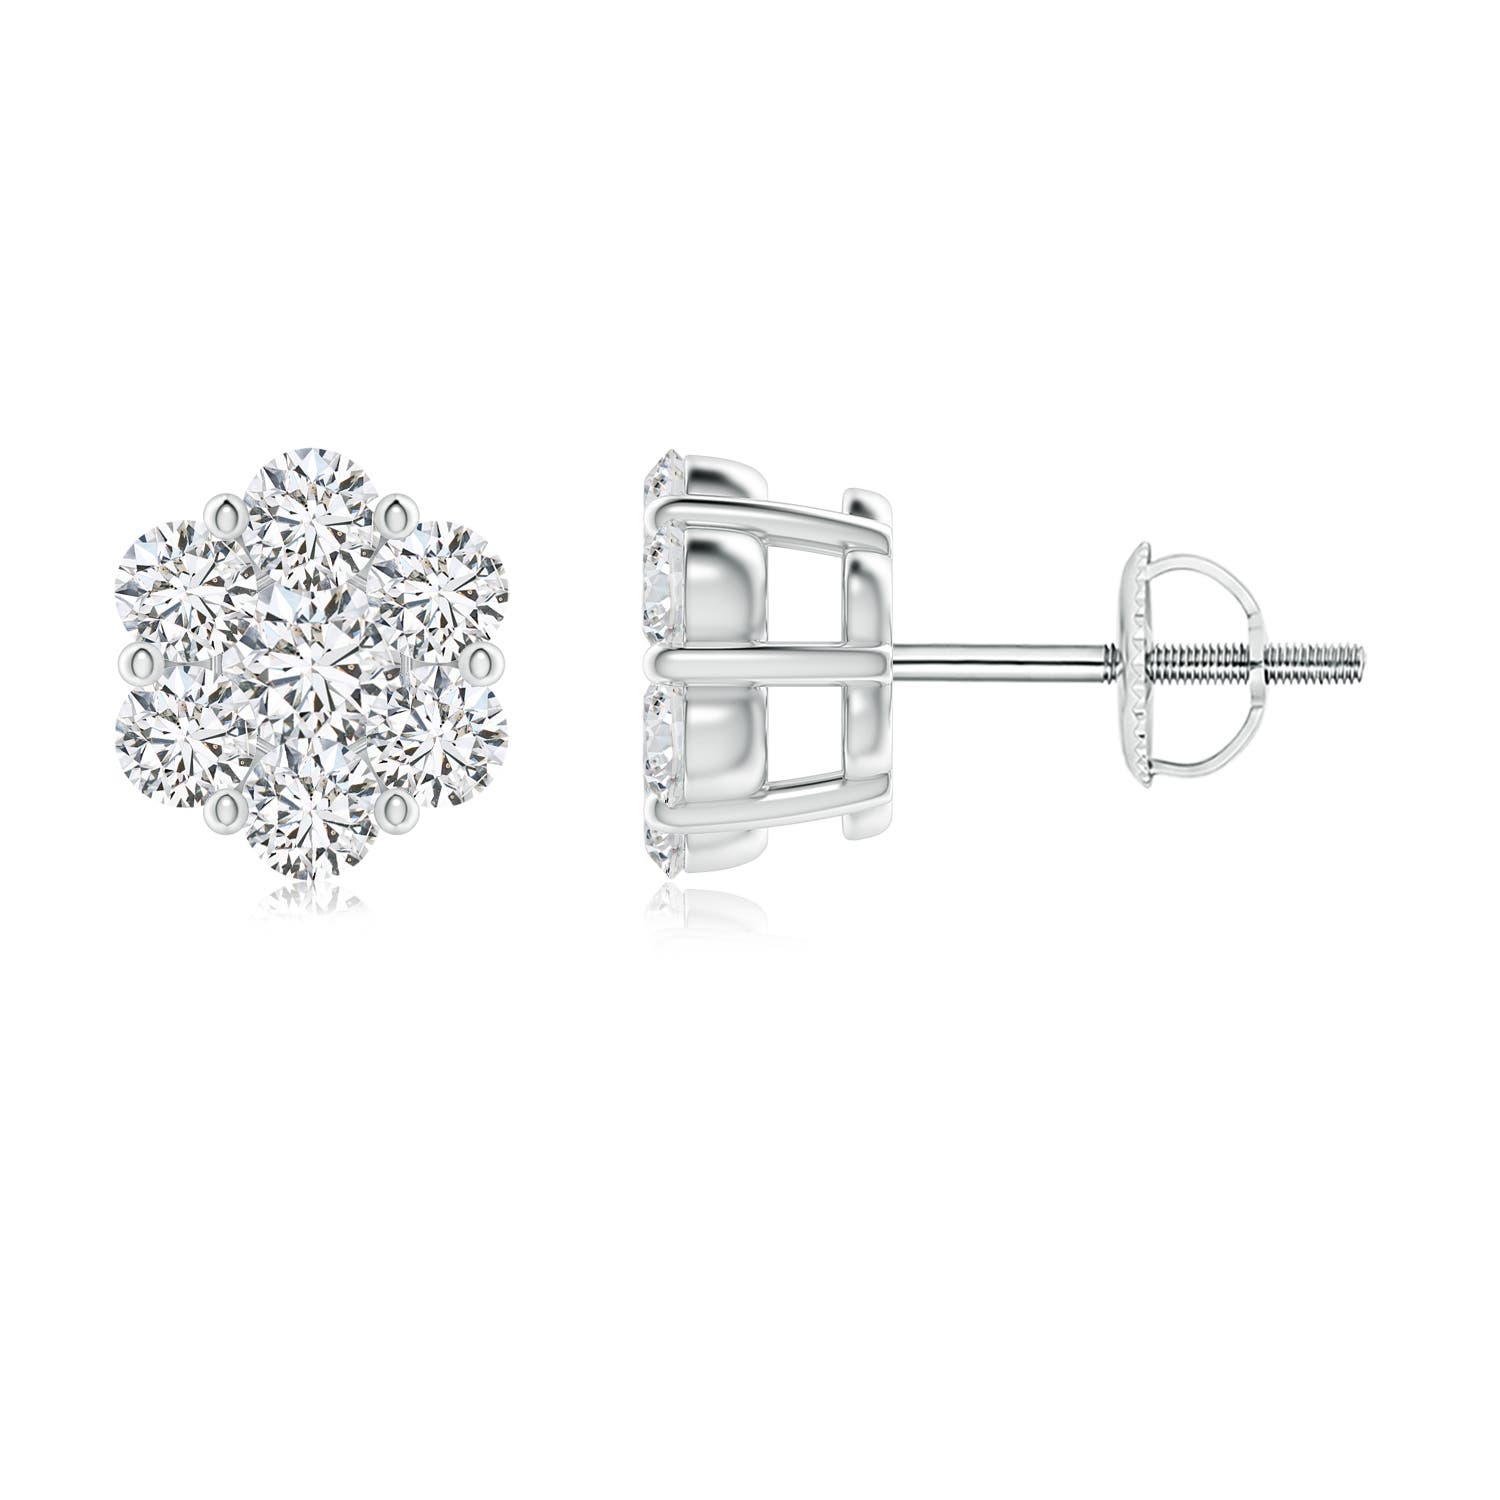 H, SI2 / 1.04 CT / 14 KT White Gold